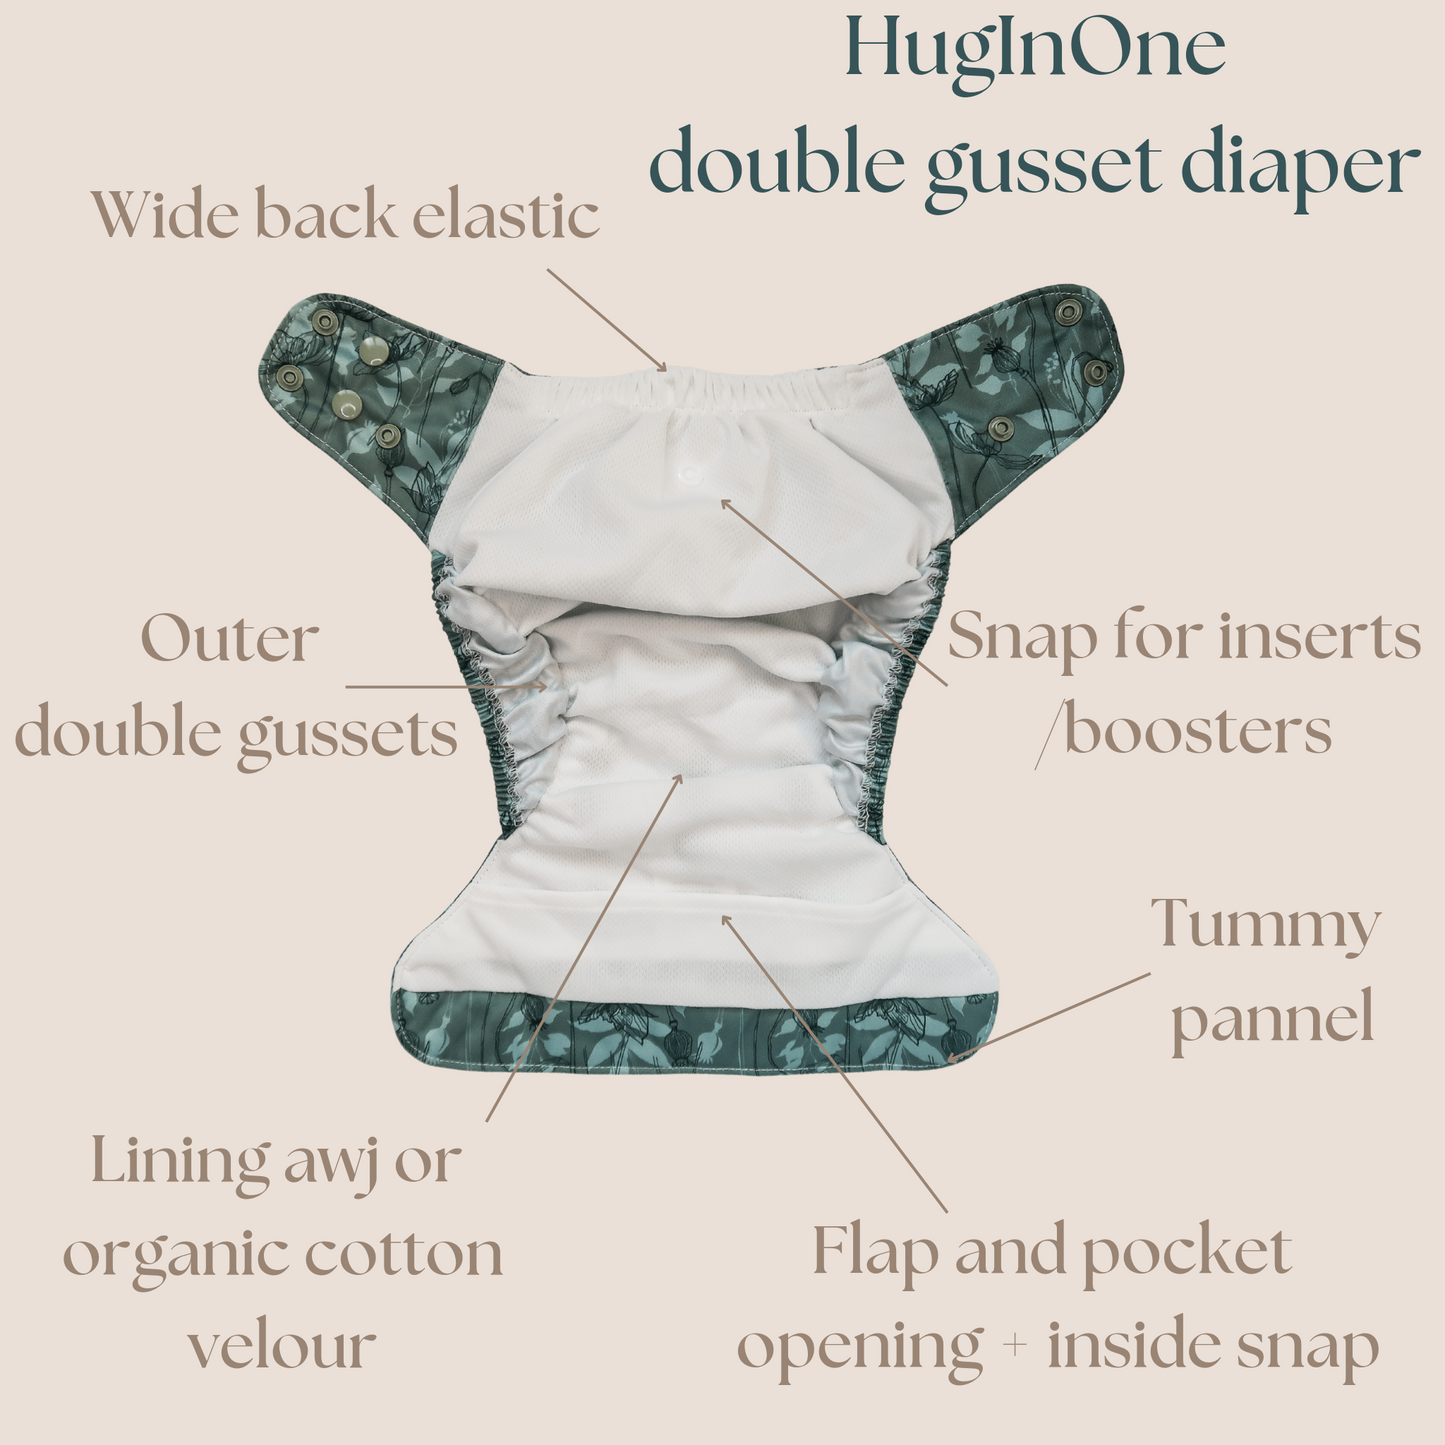 HugInOne double gusset Forest Dream